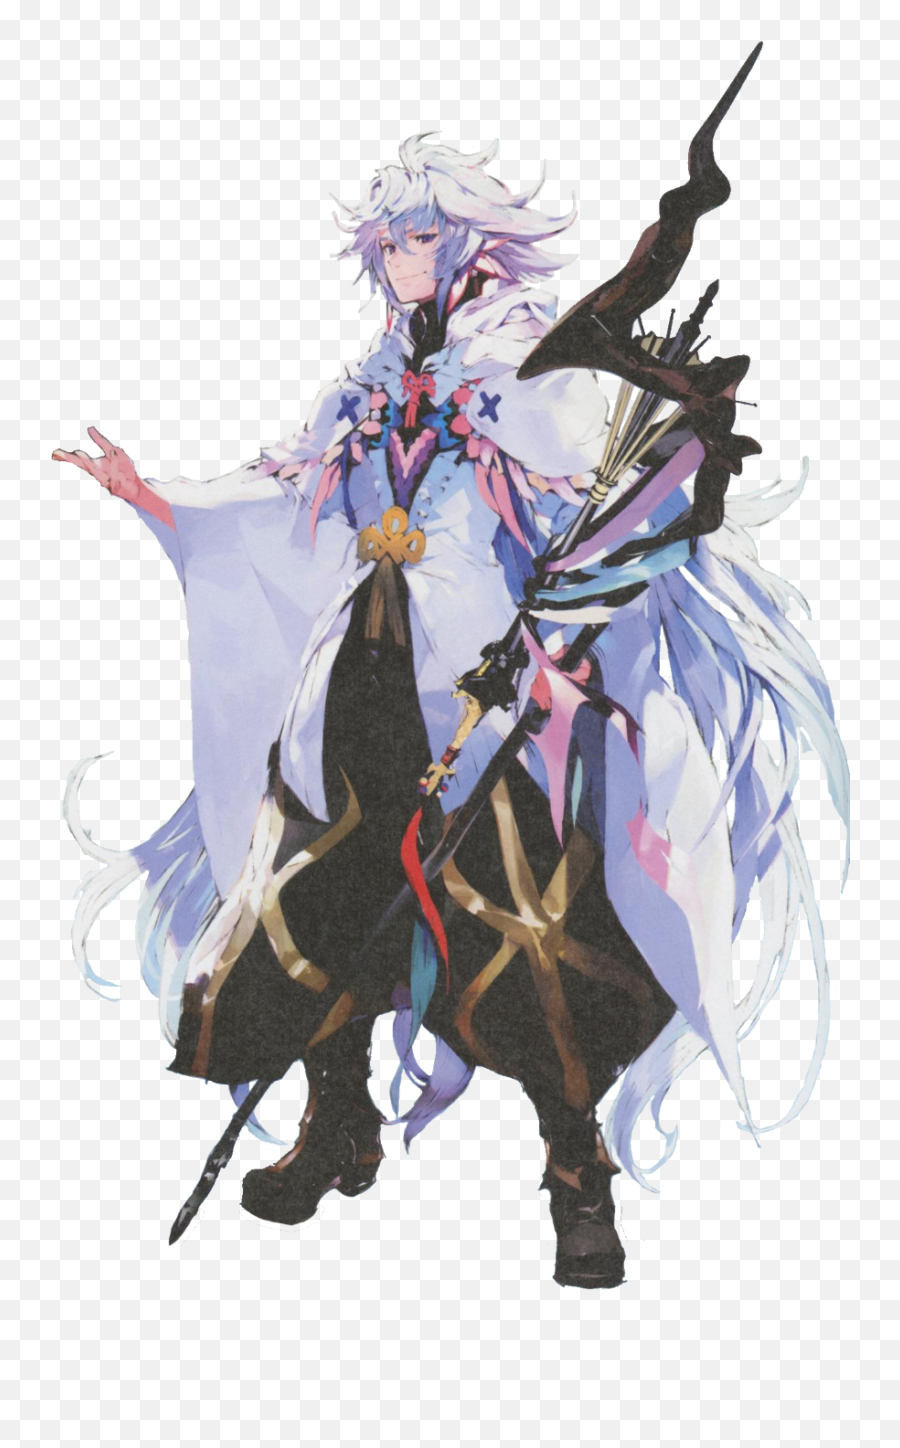 Merlin Fate Grand Order Png Image With - Merlin Fate Grand Order,Merlin Png